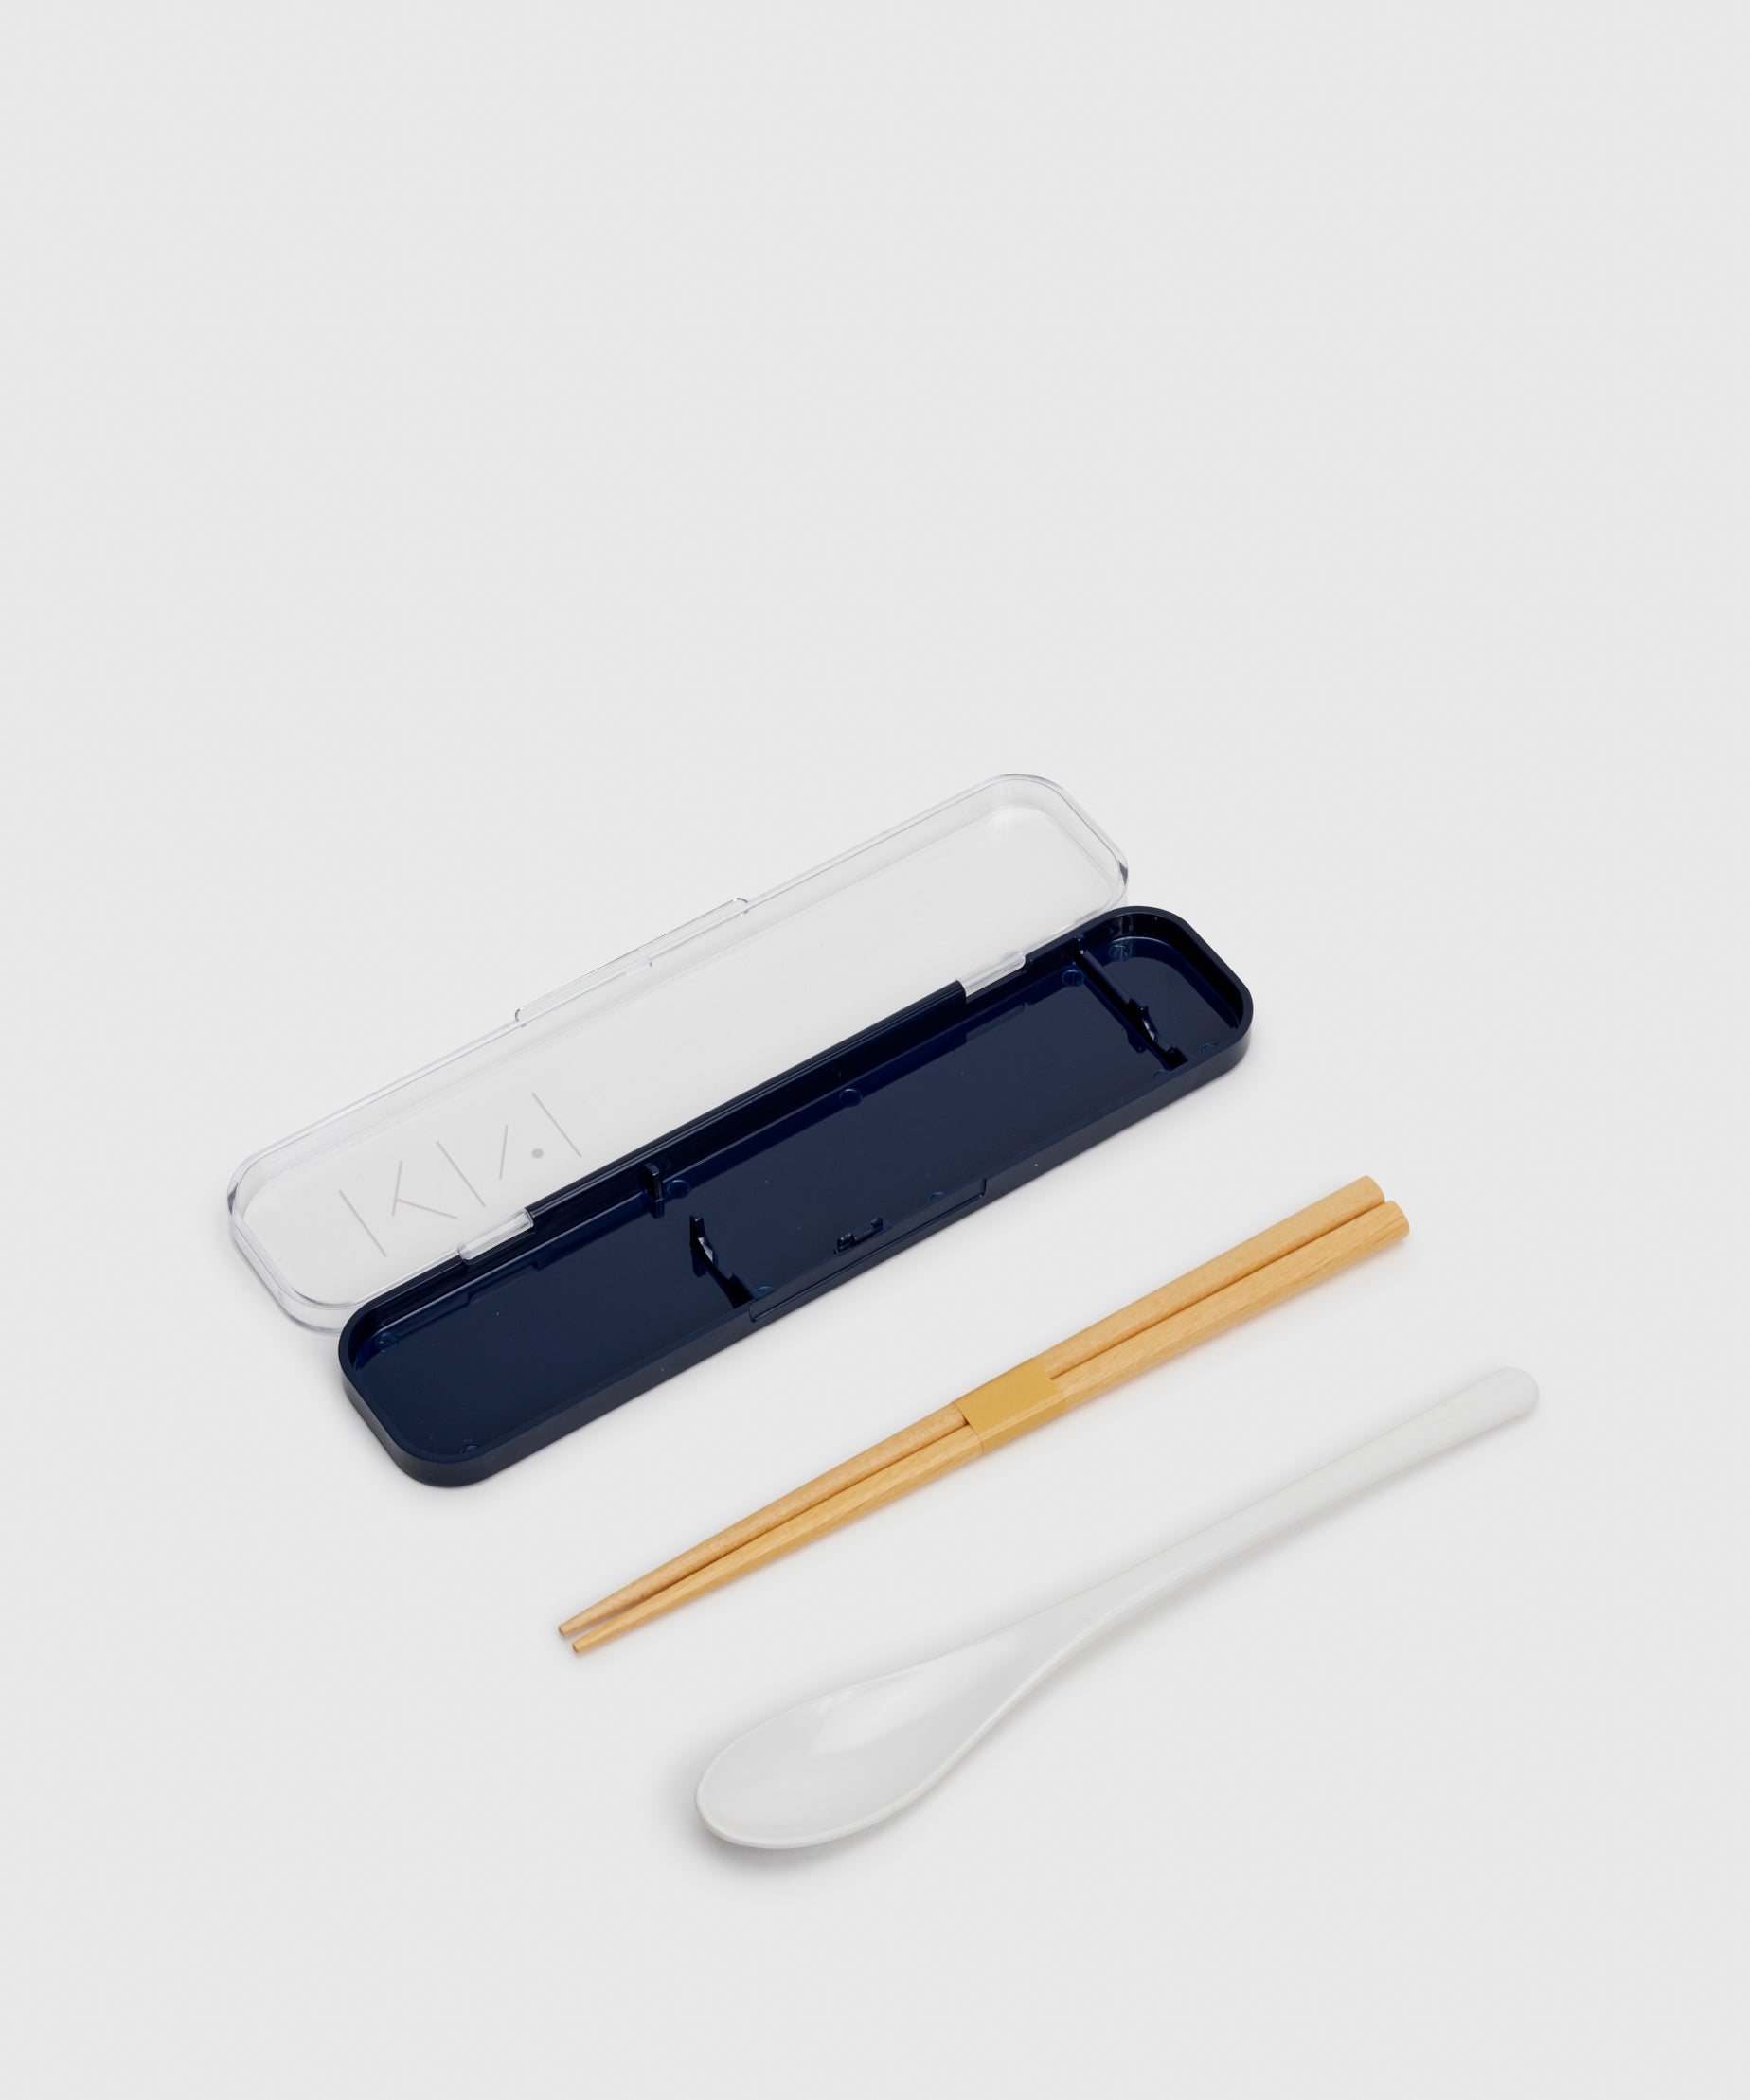 10 essential Japanese kitchenwares you need - Chopstick Chronicles